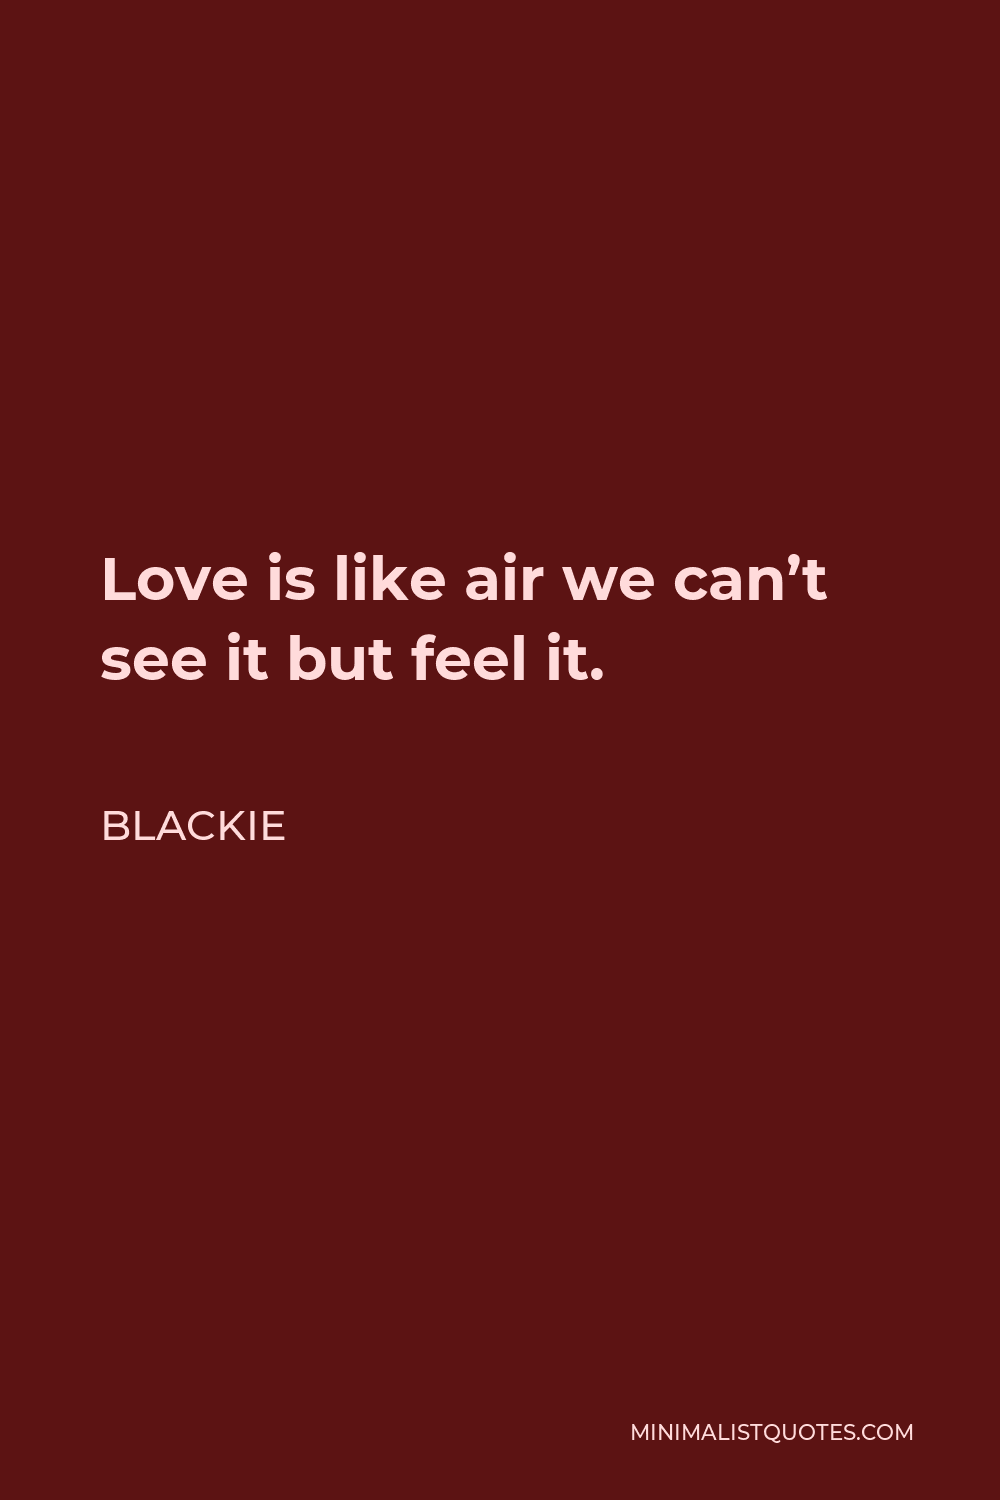 Blackie Quote - Love is like air we can’t see it but feel it.